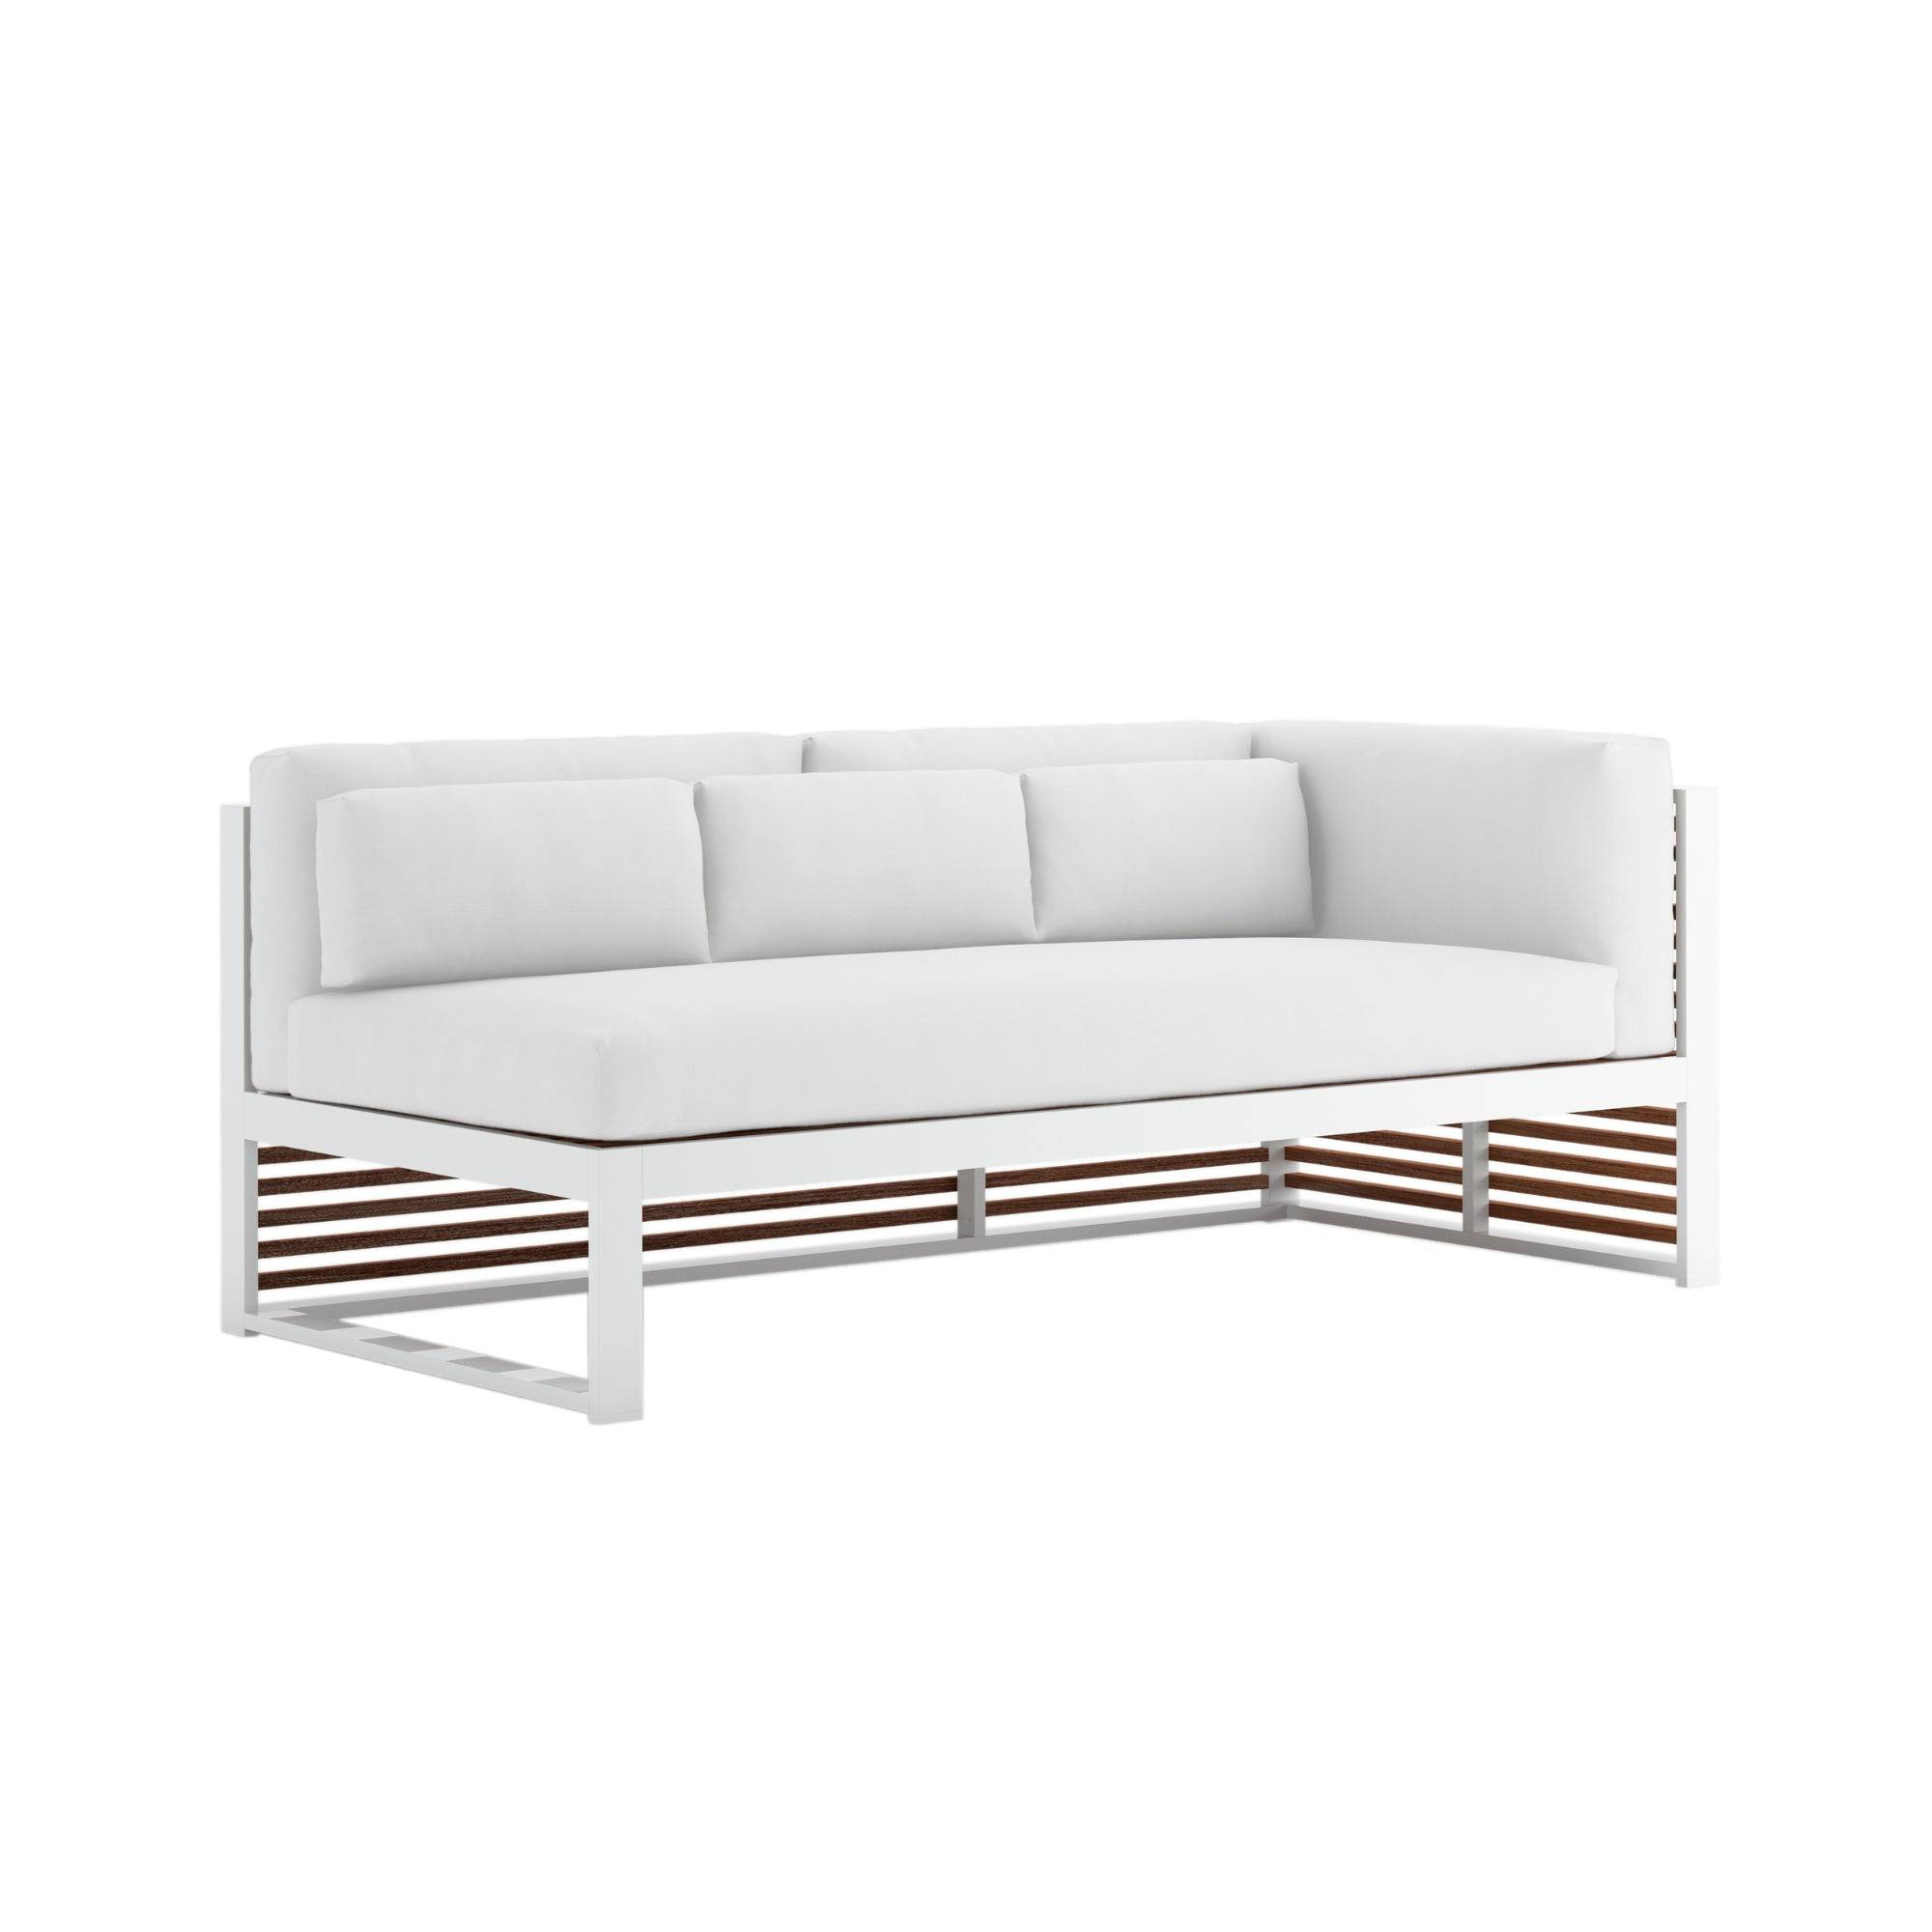 DNA Teak Sectional 1 - THAT COOL LIVING